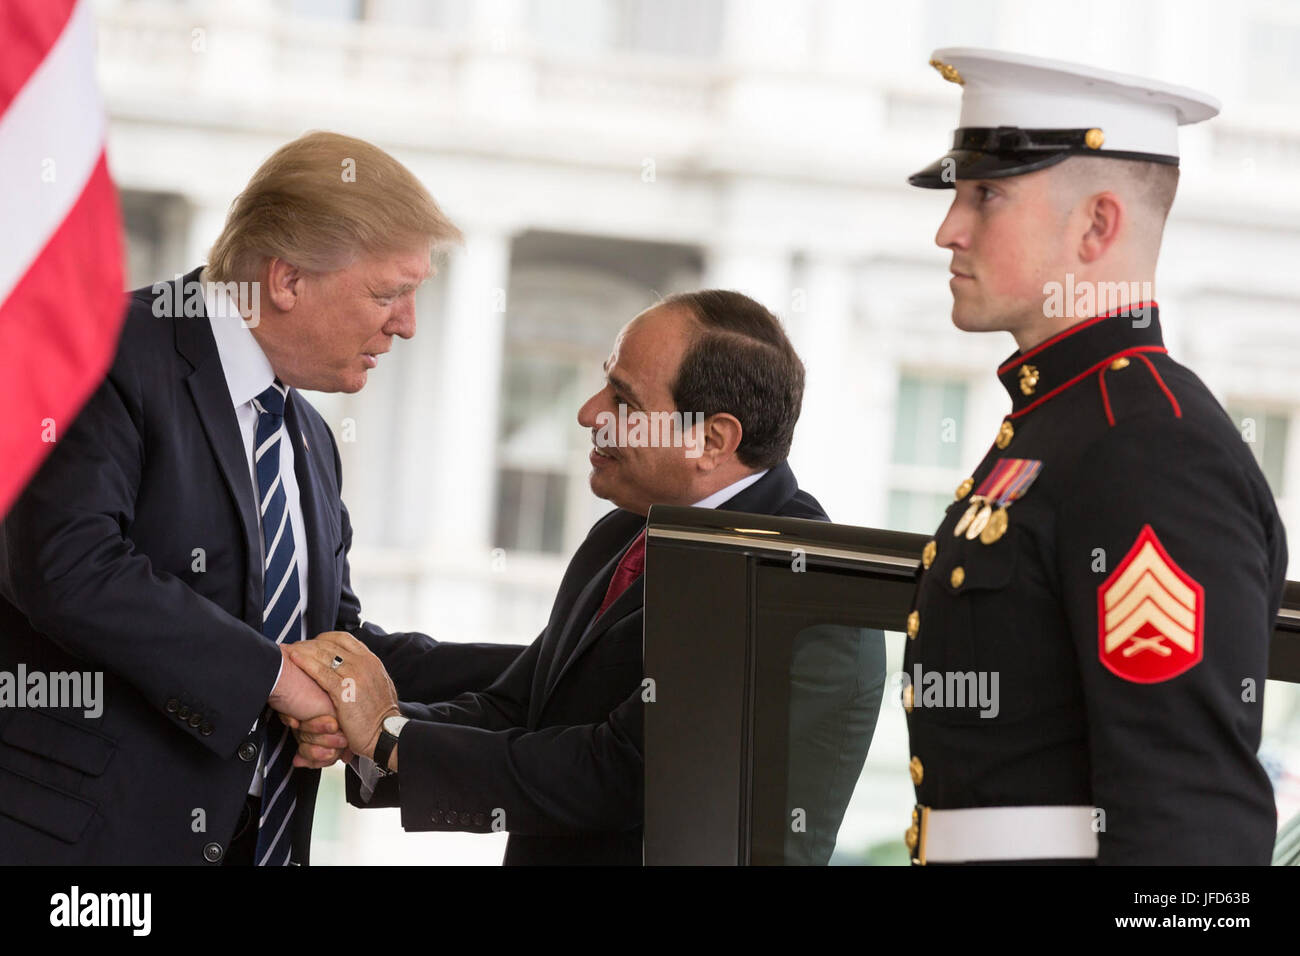 President Donald Trump welcomes Egyptian President Abdel Fattah Al Sisi, Monday, April 3, 2017, at the West Wing entrance of the White House in Washington, D.C. (Official White House Photo by Shealah Craighead) Stock Photo